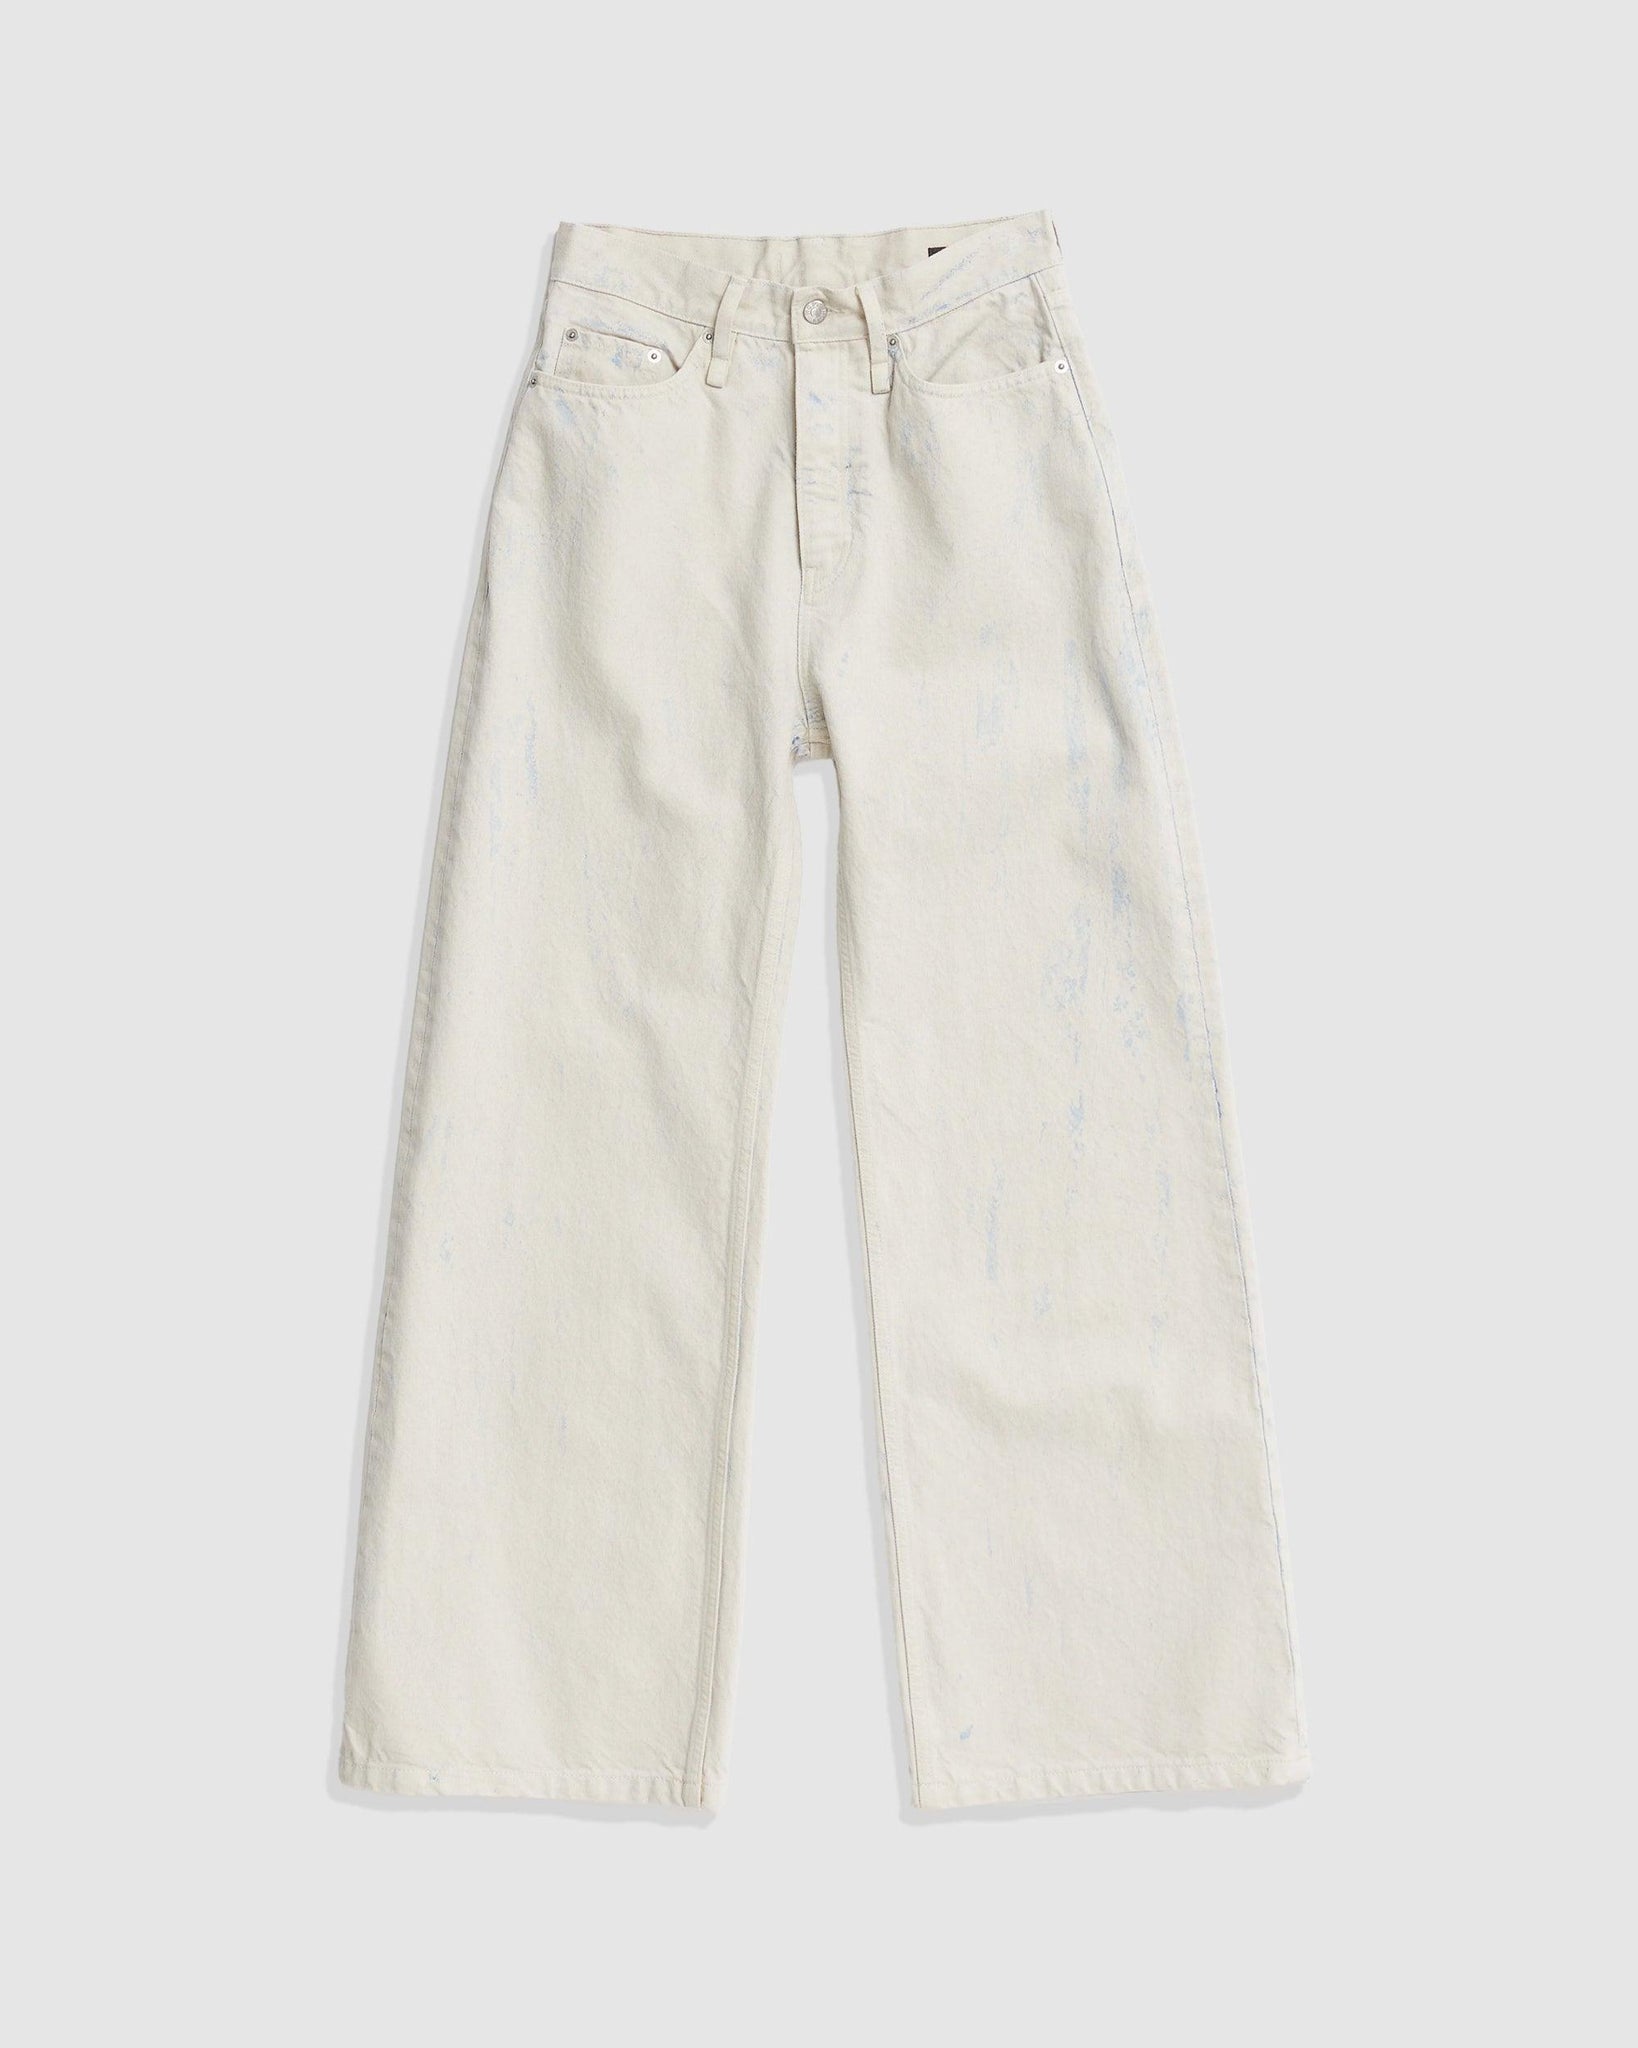 Skid Jeans Plaster Dye - {{ collection.title }} - Chinatown Country Club 